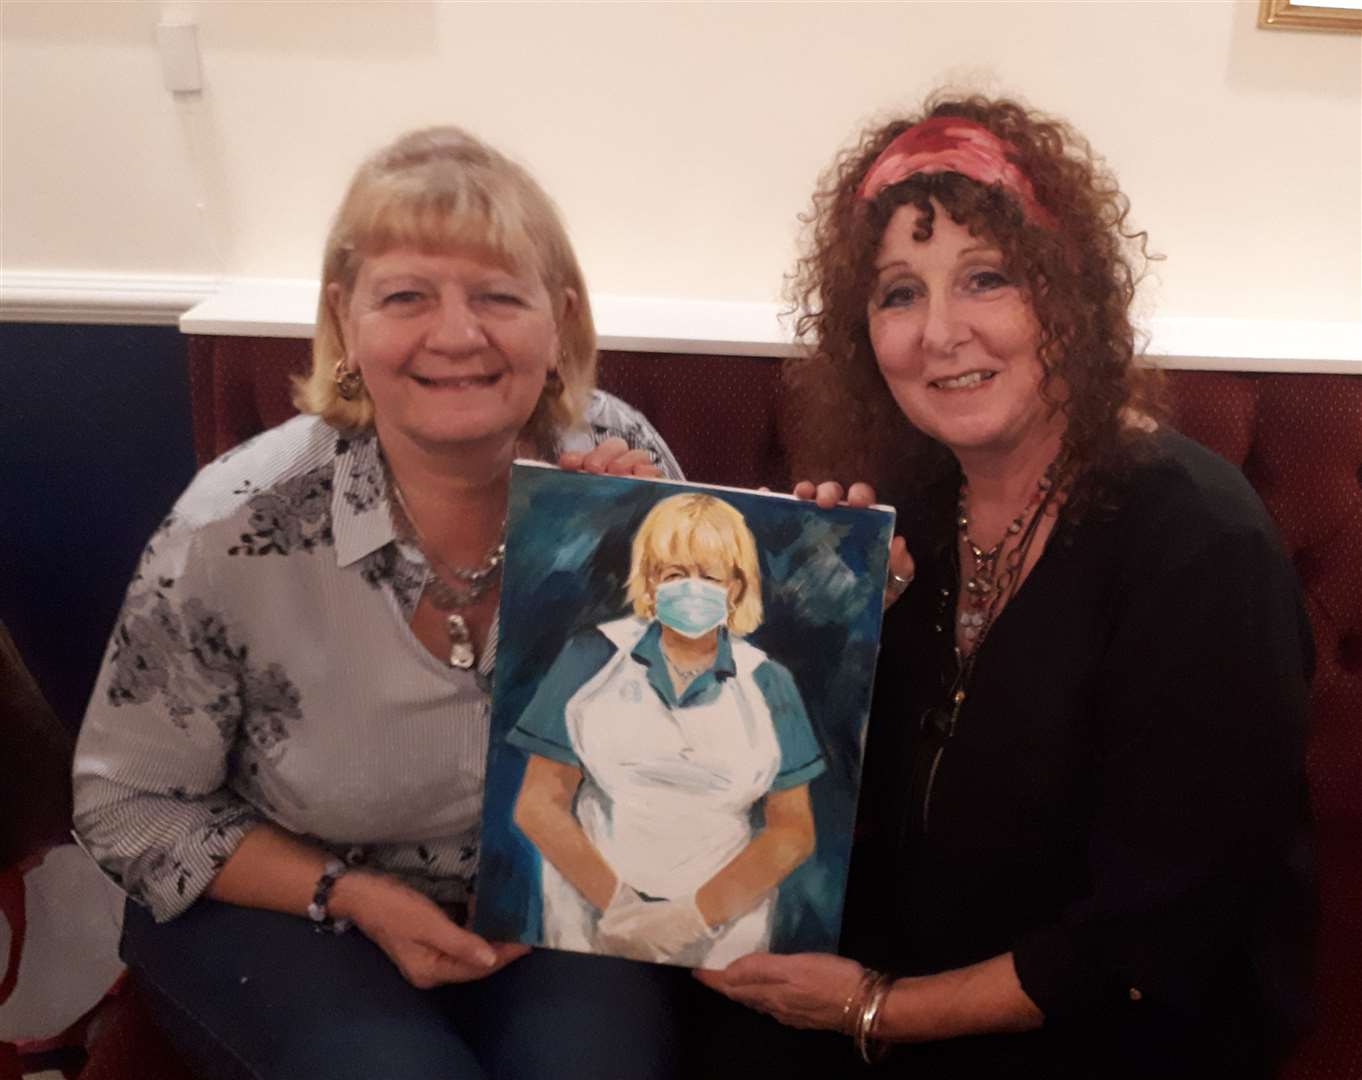 Carol Kimber of Maidstone is presented with her portrait by friend and Sheppey artist Julie Bradshaw-Drury